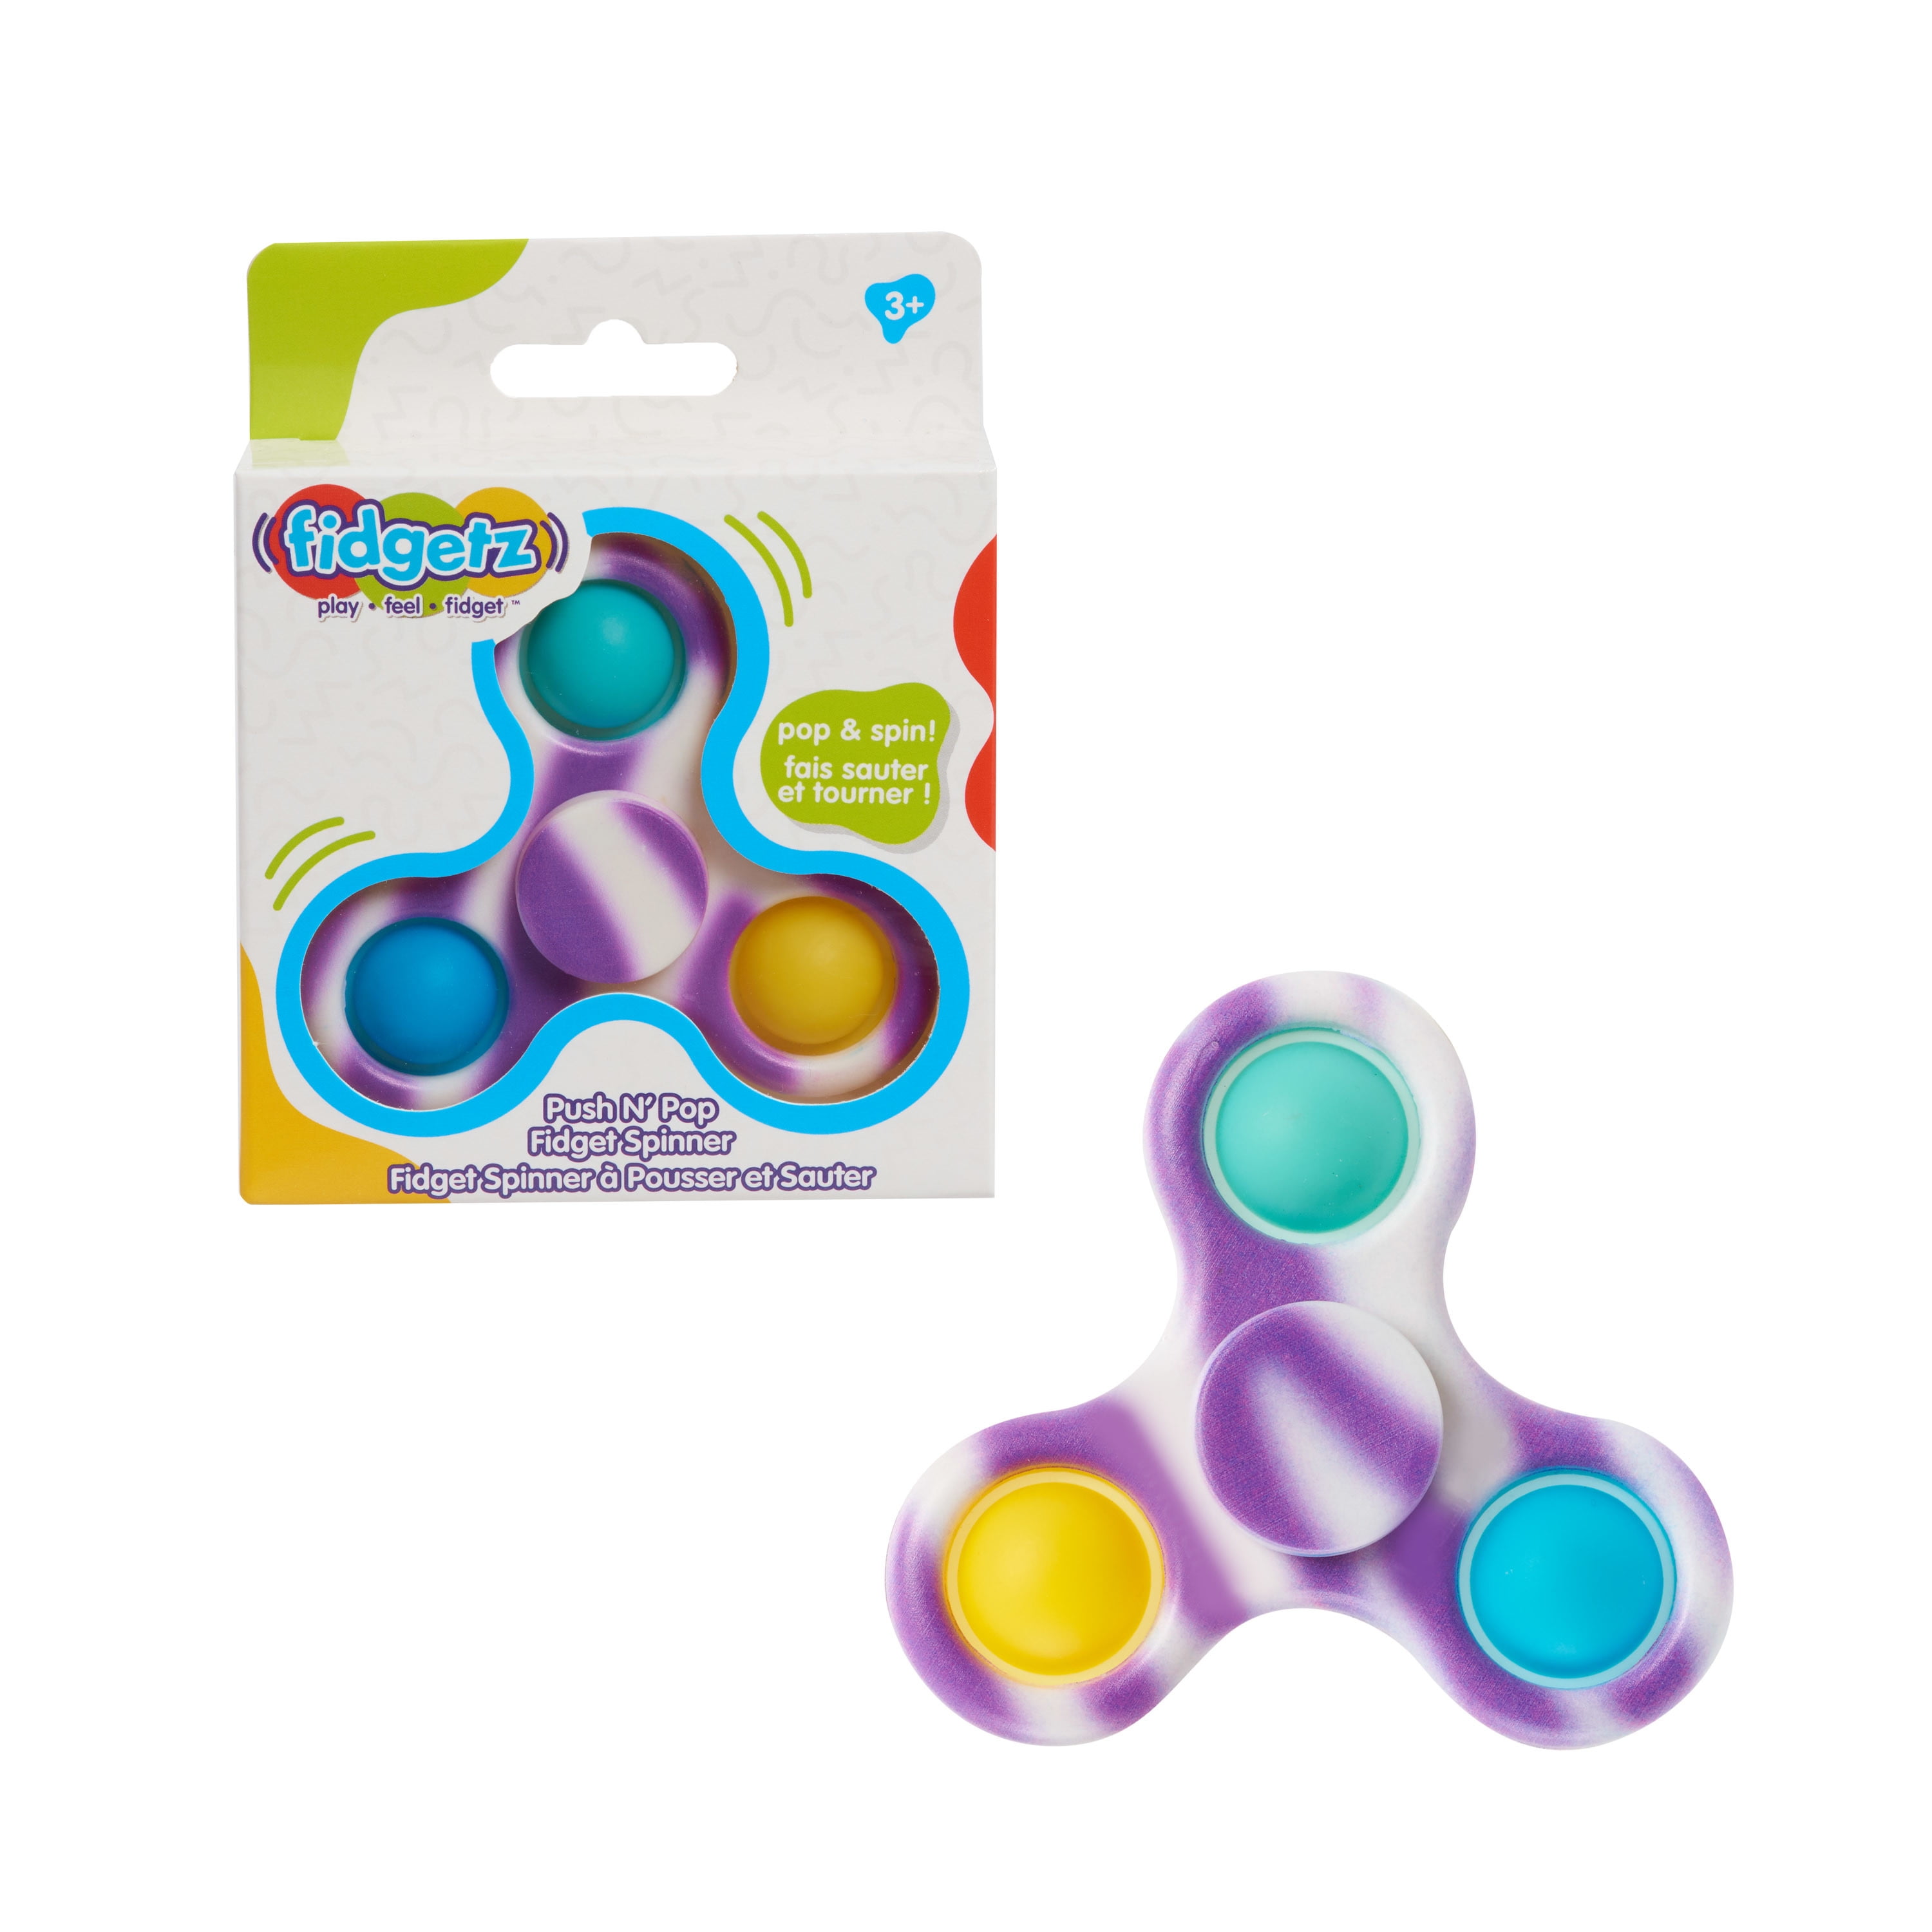 Fidgetz Pop Spinner Fidget Toys, Button Sensory Toys for Kids and Adults, Anxiety and Stress Relief Toys, Fidget Spinner,  Kids Toys for Ages 3 Up, Gifts and Presents